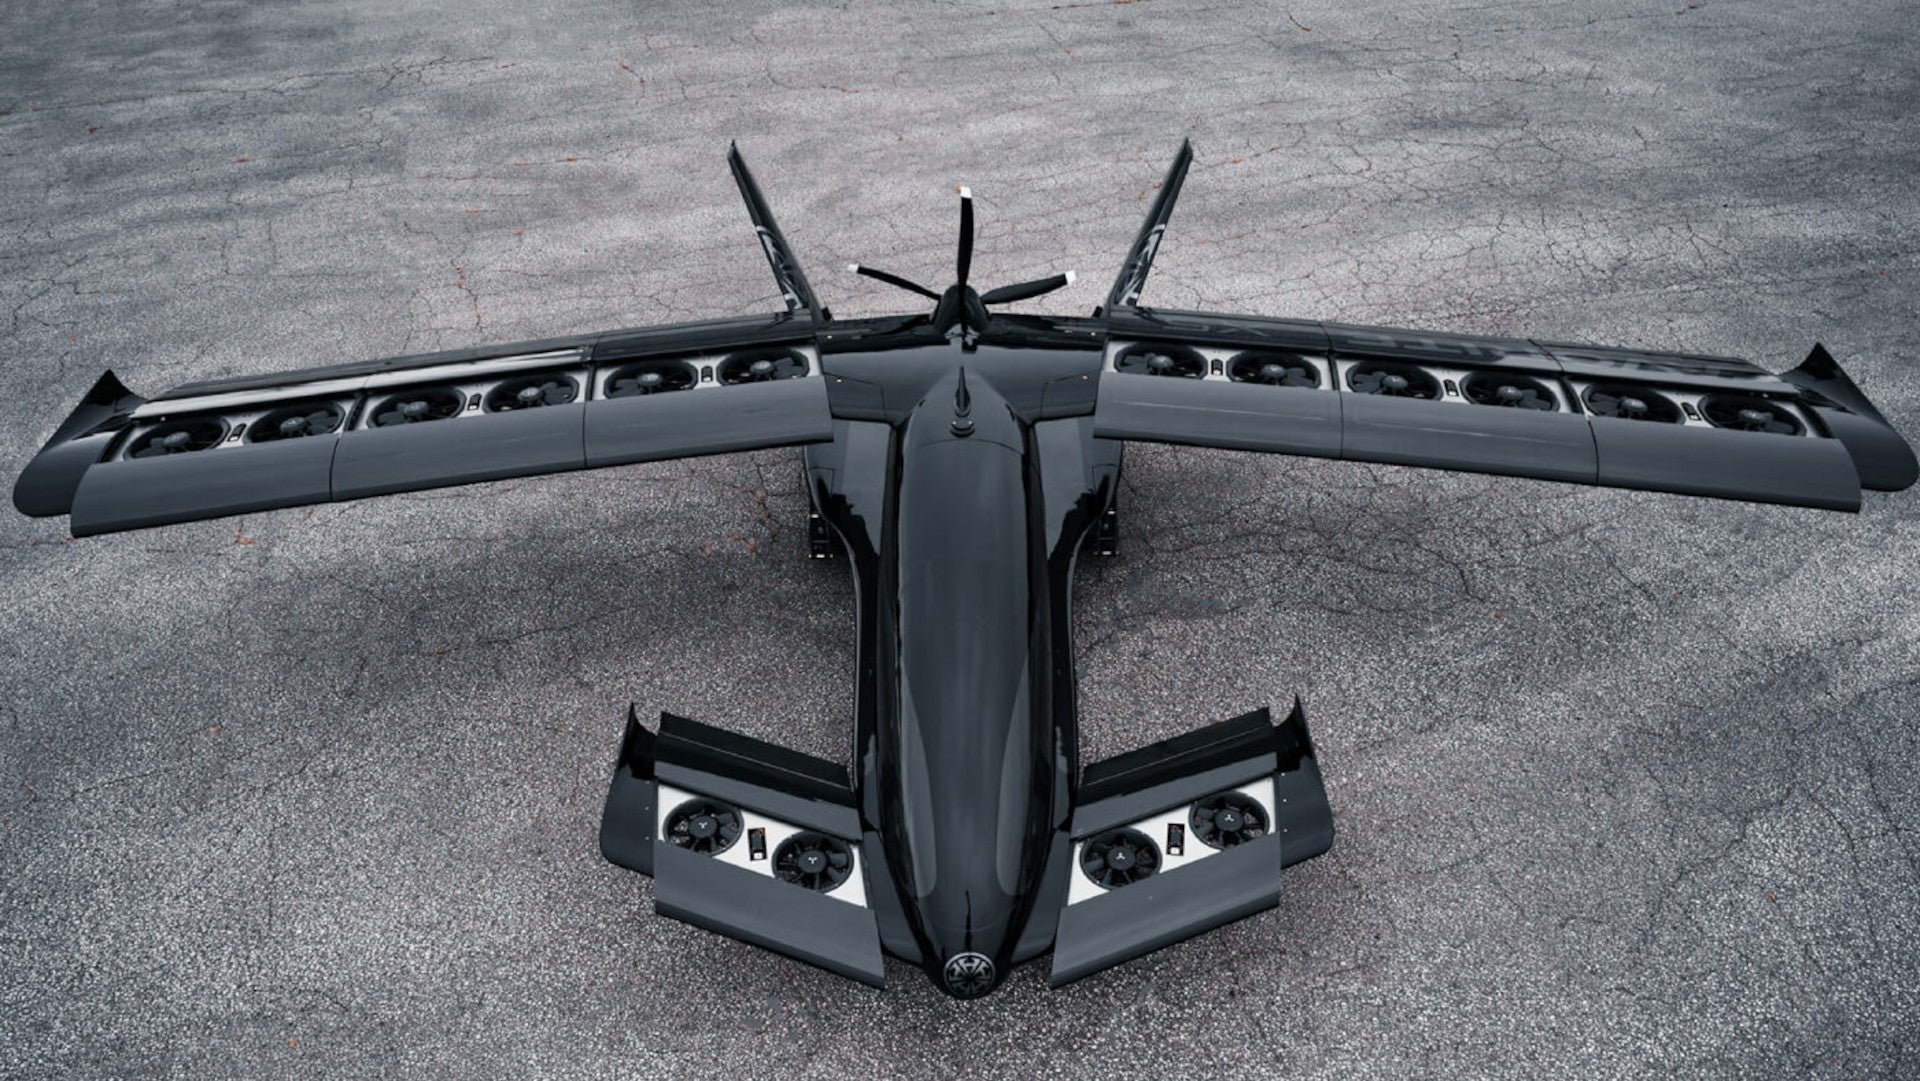 Horizon Aircraft Goes Public, Secures Order for Up to 100 Hybrid-Electric Models